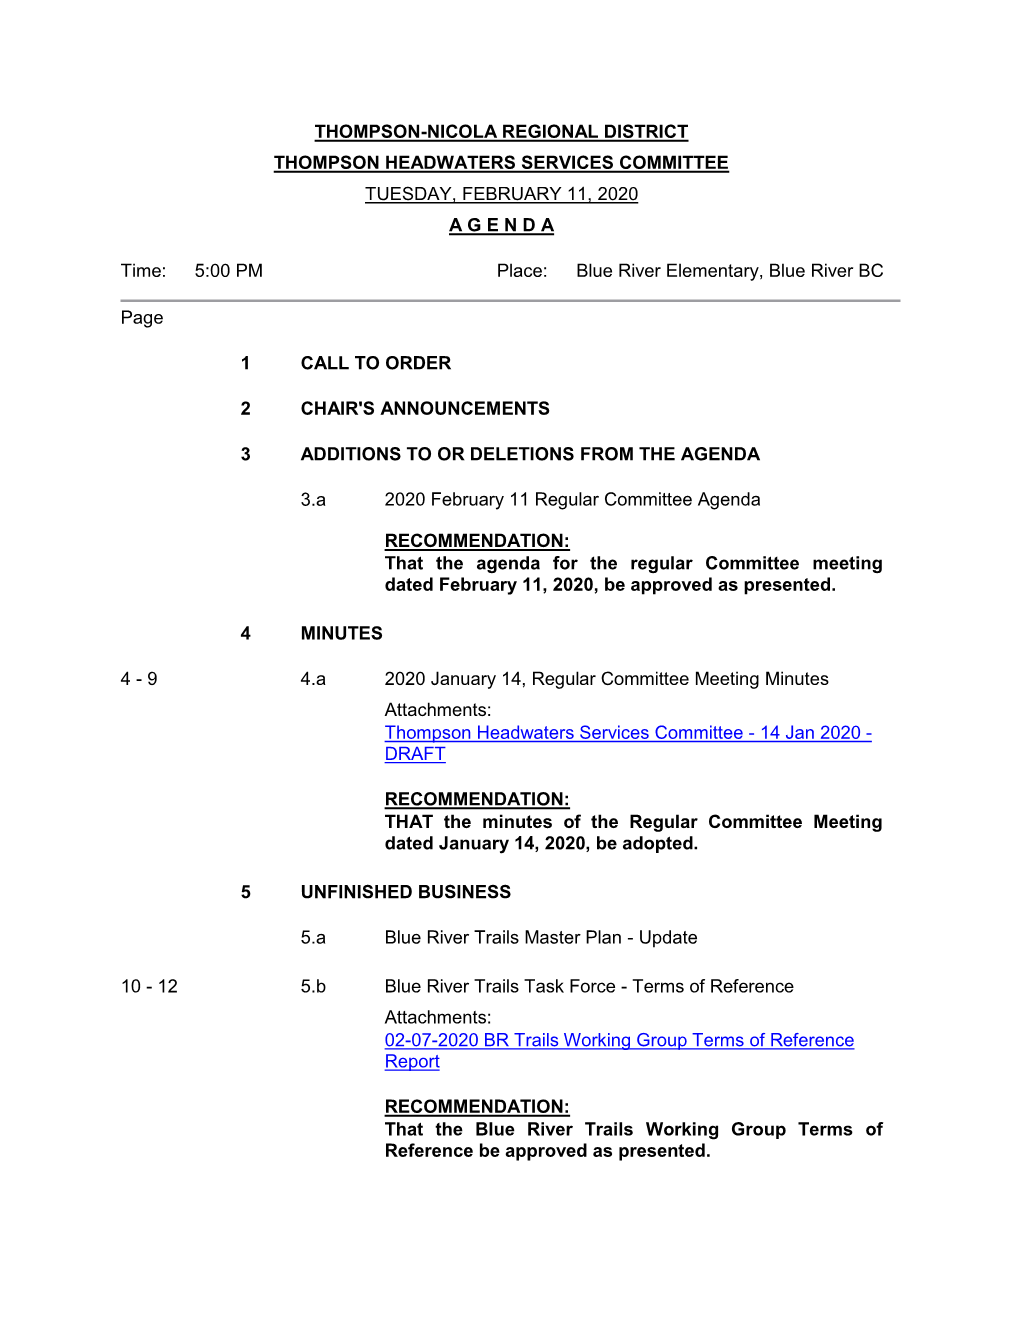 Thompson Headwaters Services Committee Tuesday, February 11, 2020 a G E N D A